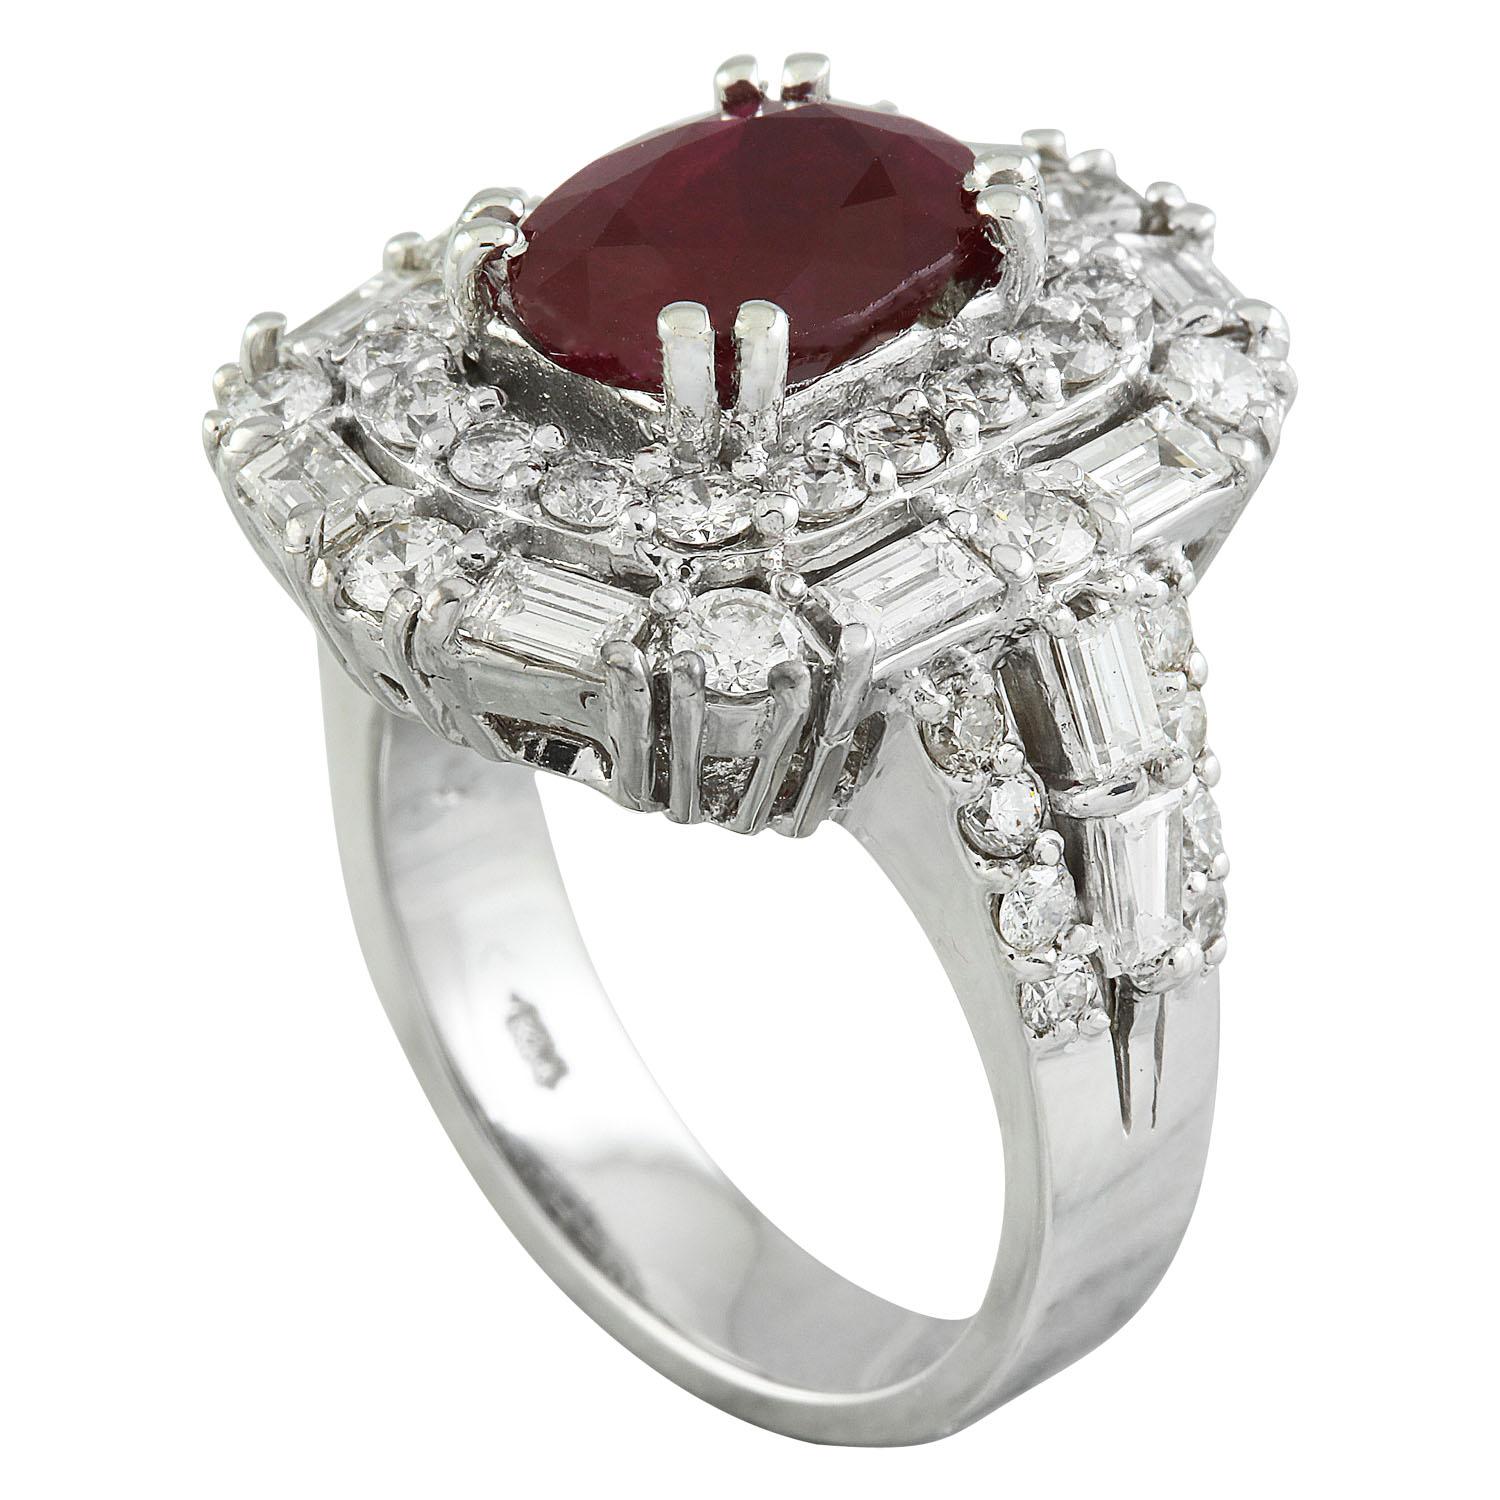 5.70 Carat Natural Ruby 14 Karat Solid White Gold Diamond Ring
Stamped: 14K 
Total Ring Weight: 11.7 Grams 
Ruby Weight 3.20 Carat (10.00x8.00 Millimeters)
Diamond Weight: 2.50 carat (F-G Color, VS2-SI1 Clarity )
Face Measures: 21.40x17.80